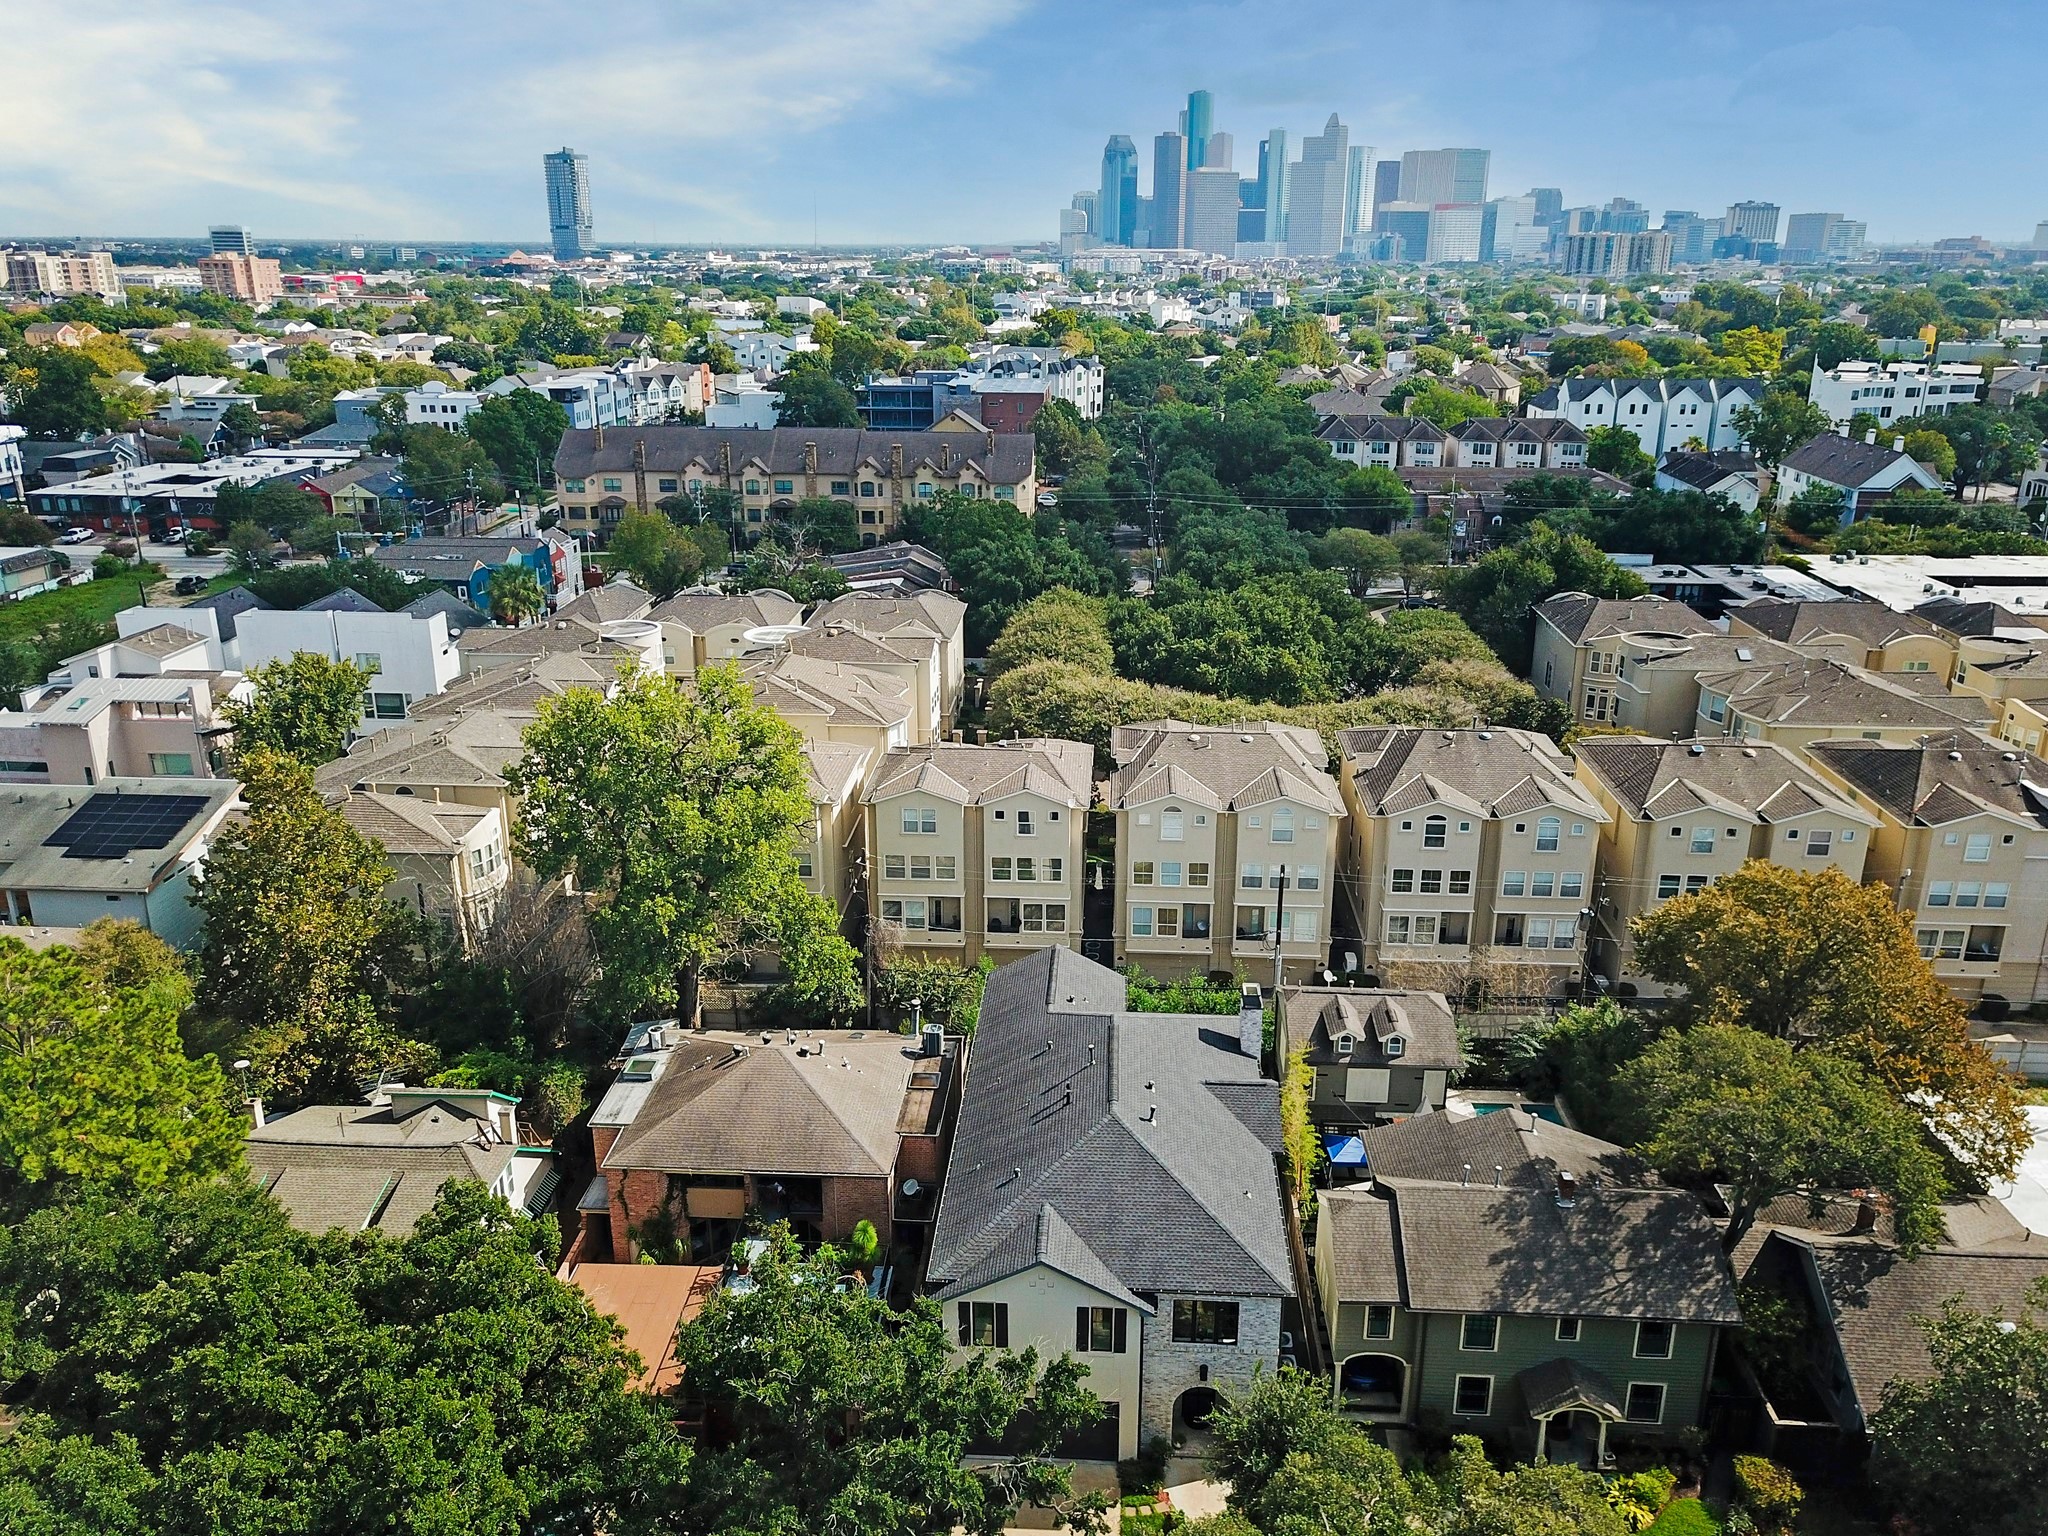 Amazing location just two blocks to Cherryhurst Park,
close to the local Montessori school, and only a short distance to local restaurants, shops, The Menil Collection
and downtown Houston.